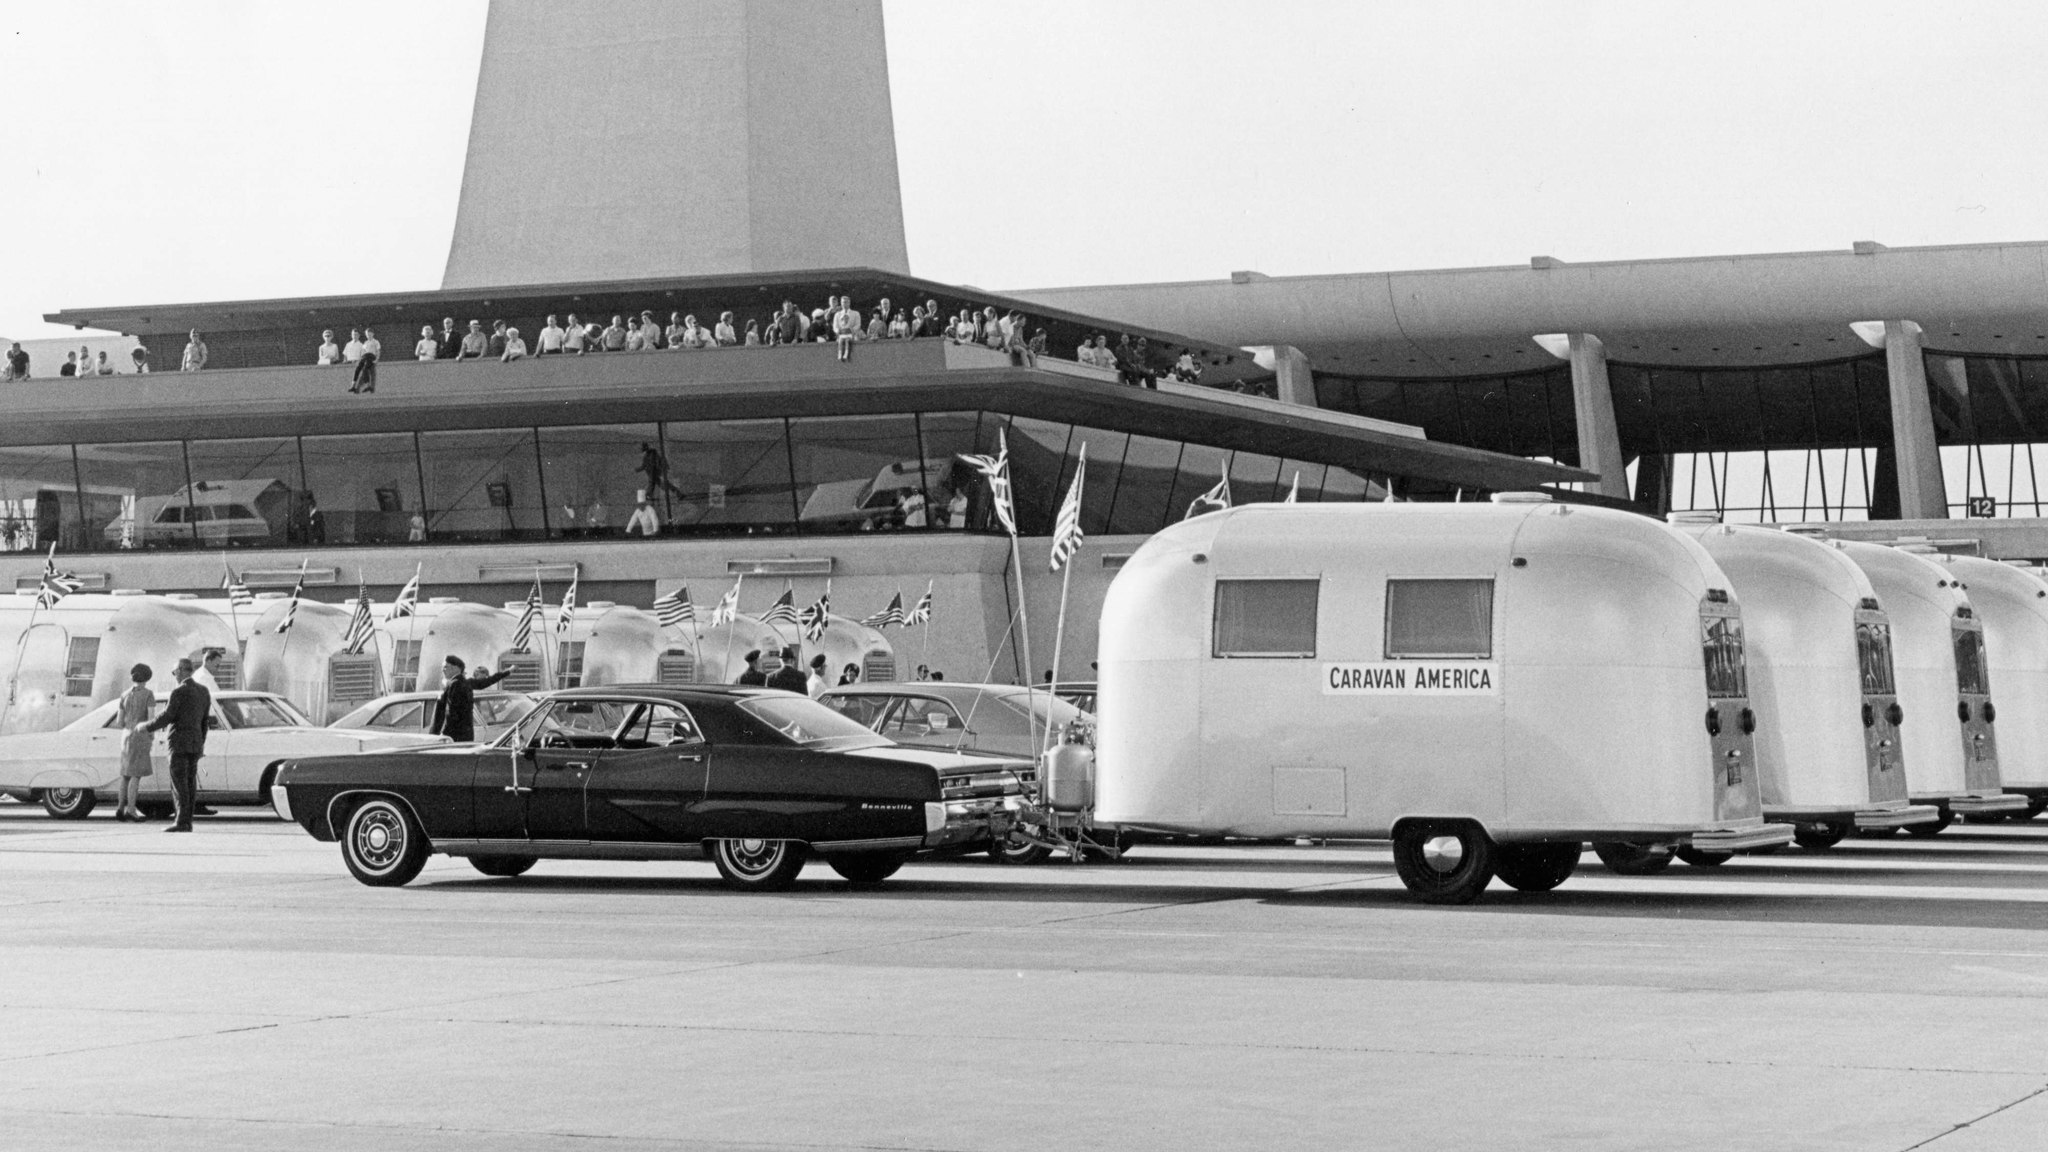 Airstream travel trailers lined up in front of a tall building during Airstream's Caravan America